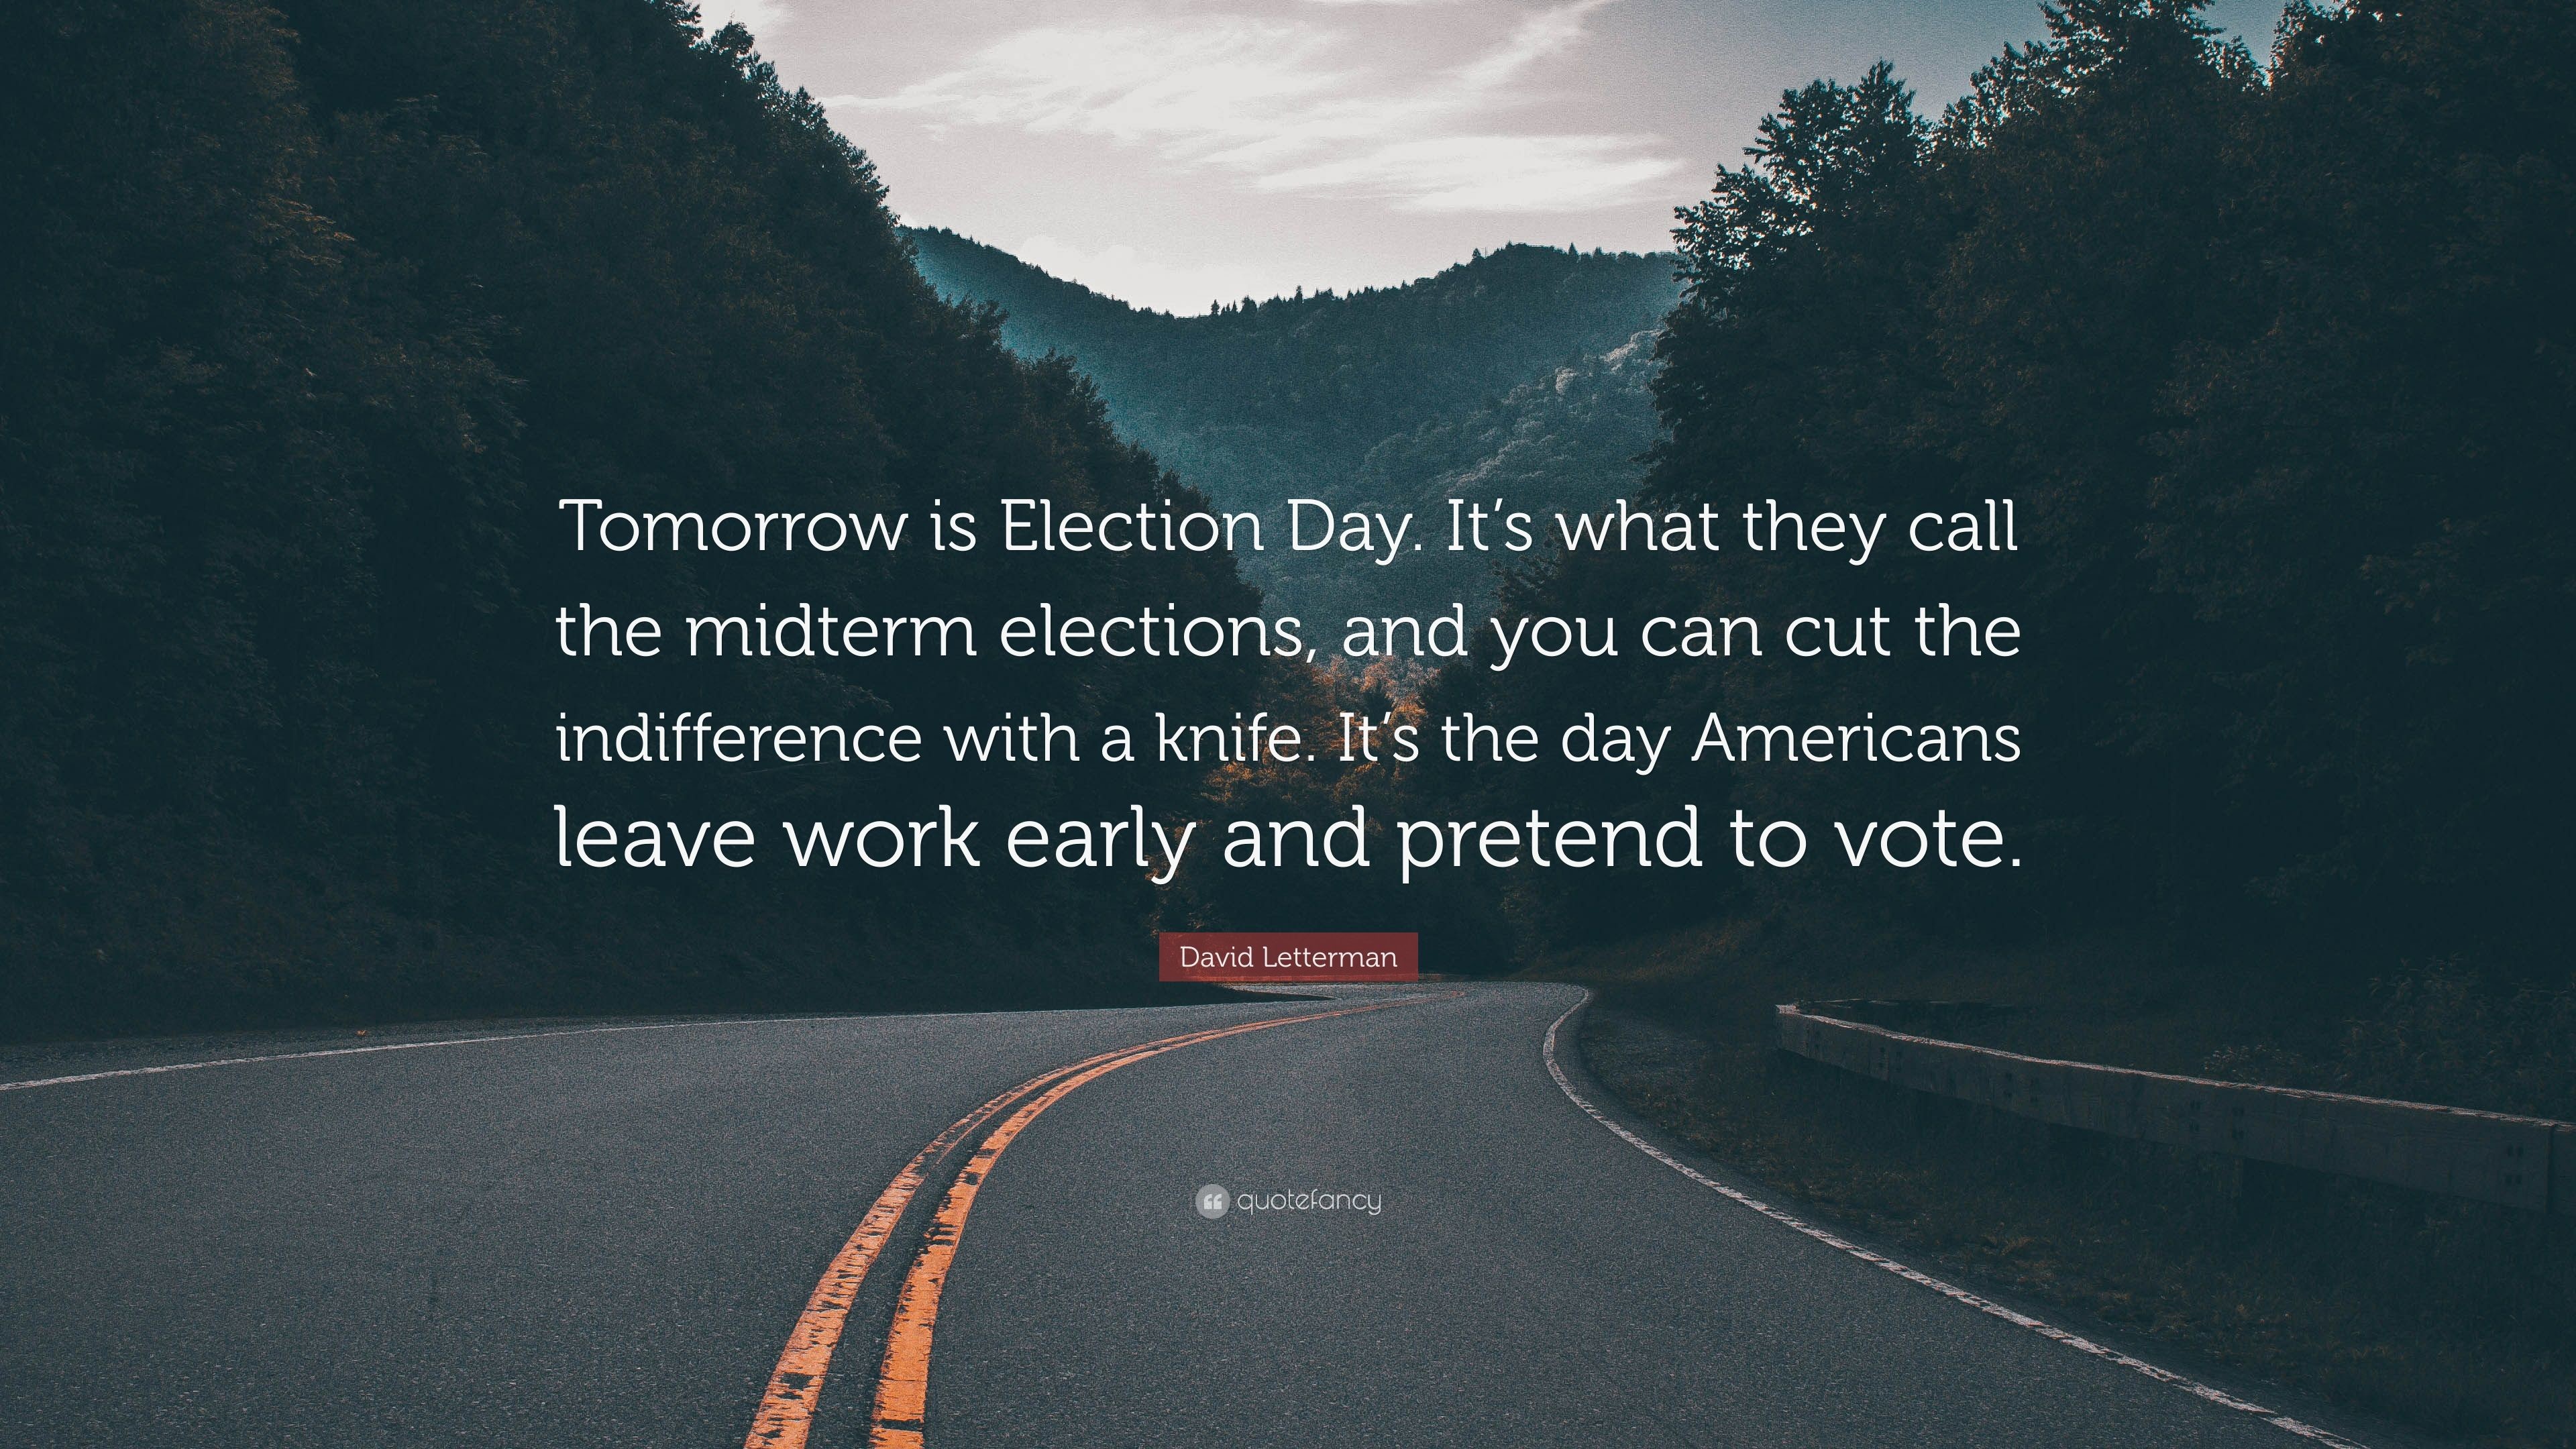 3840x2160 David Letterman Quote: "Tomorrow is Election Day. 